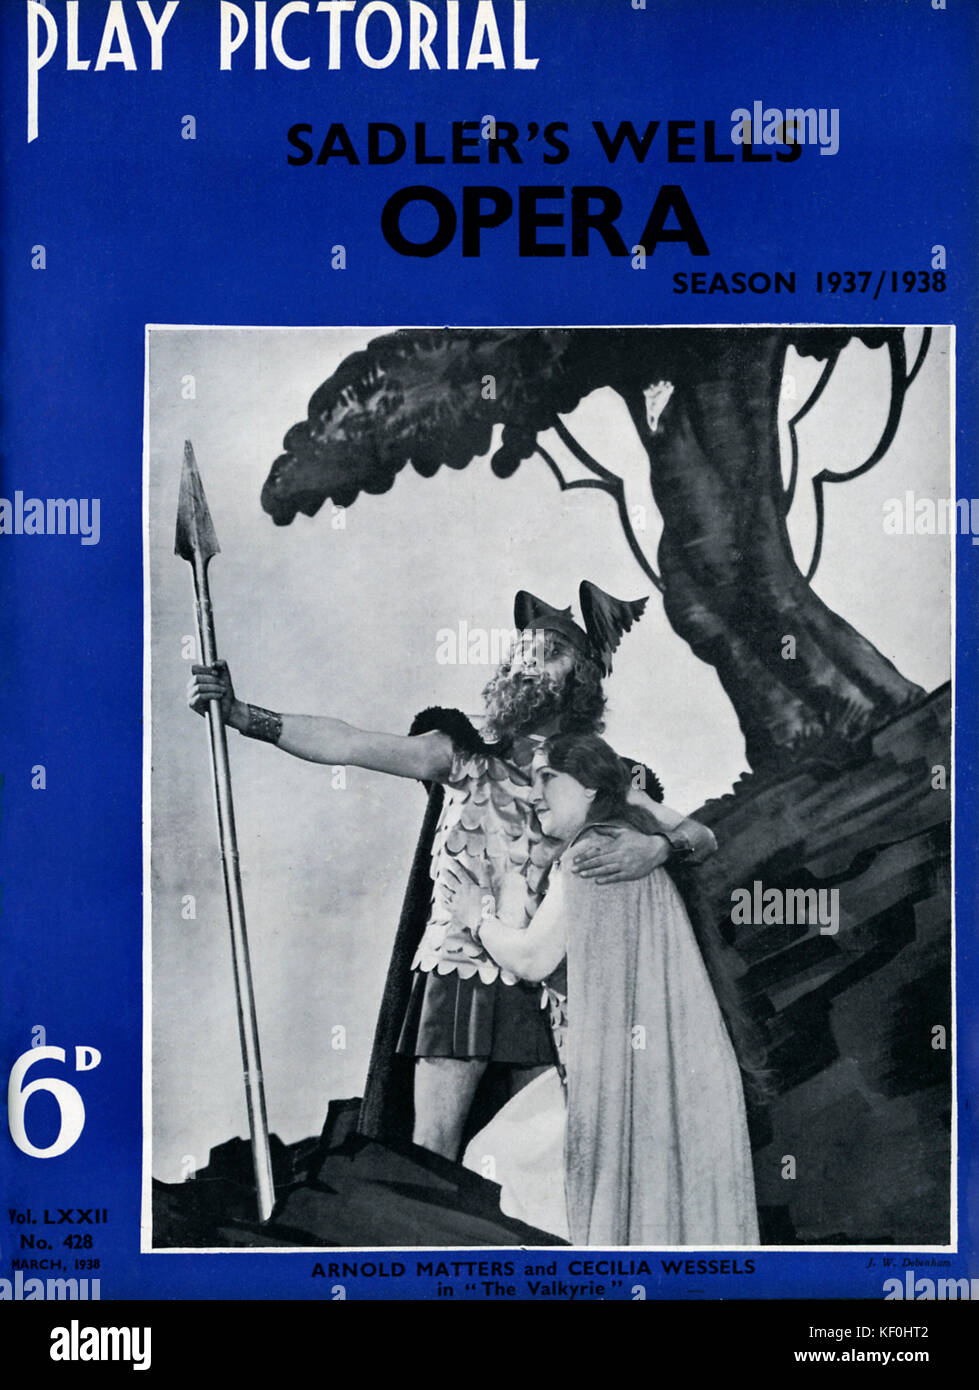 'The Valkyrie' (Die Walküre) by Wagner, with Arnold Matters and Cecilia Wessels at Sadler's Wells, London, 1937. AM, 11 April 1904 - 21 September 1990. CW, 7 August 1895 - 14 December 1970. Cover of 'Play Pictorial'. Stock Photo